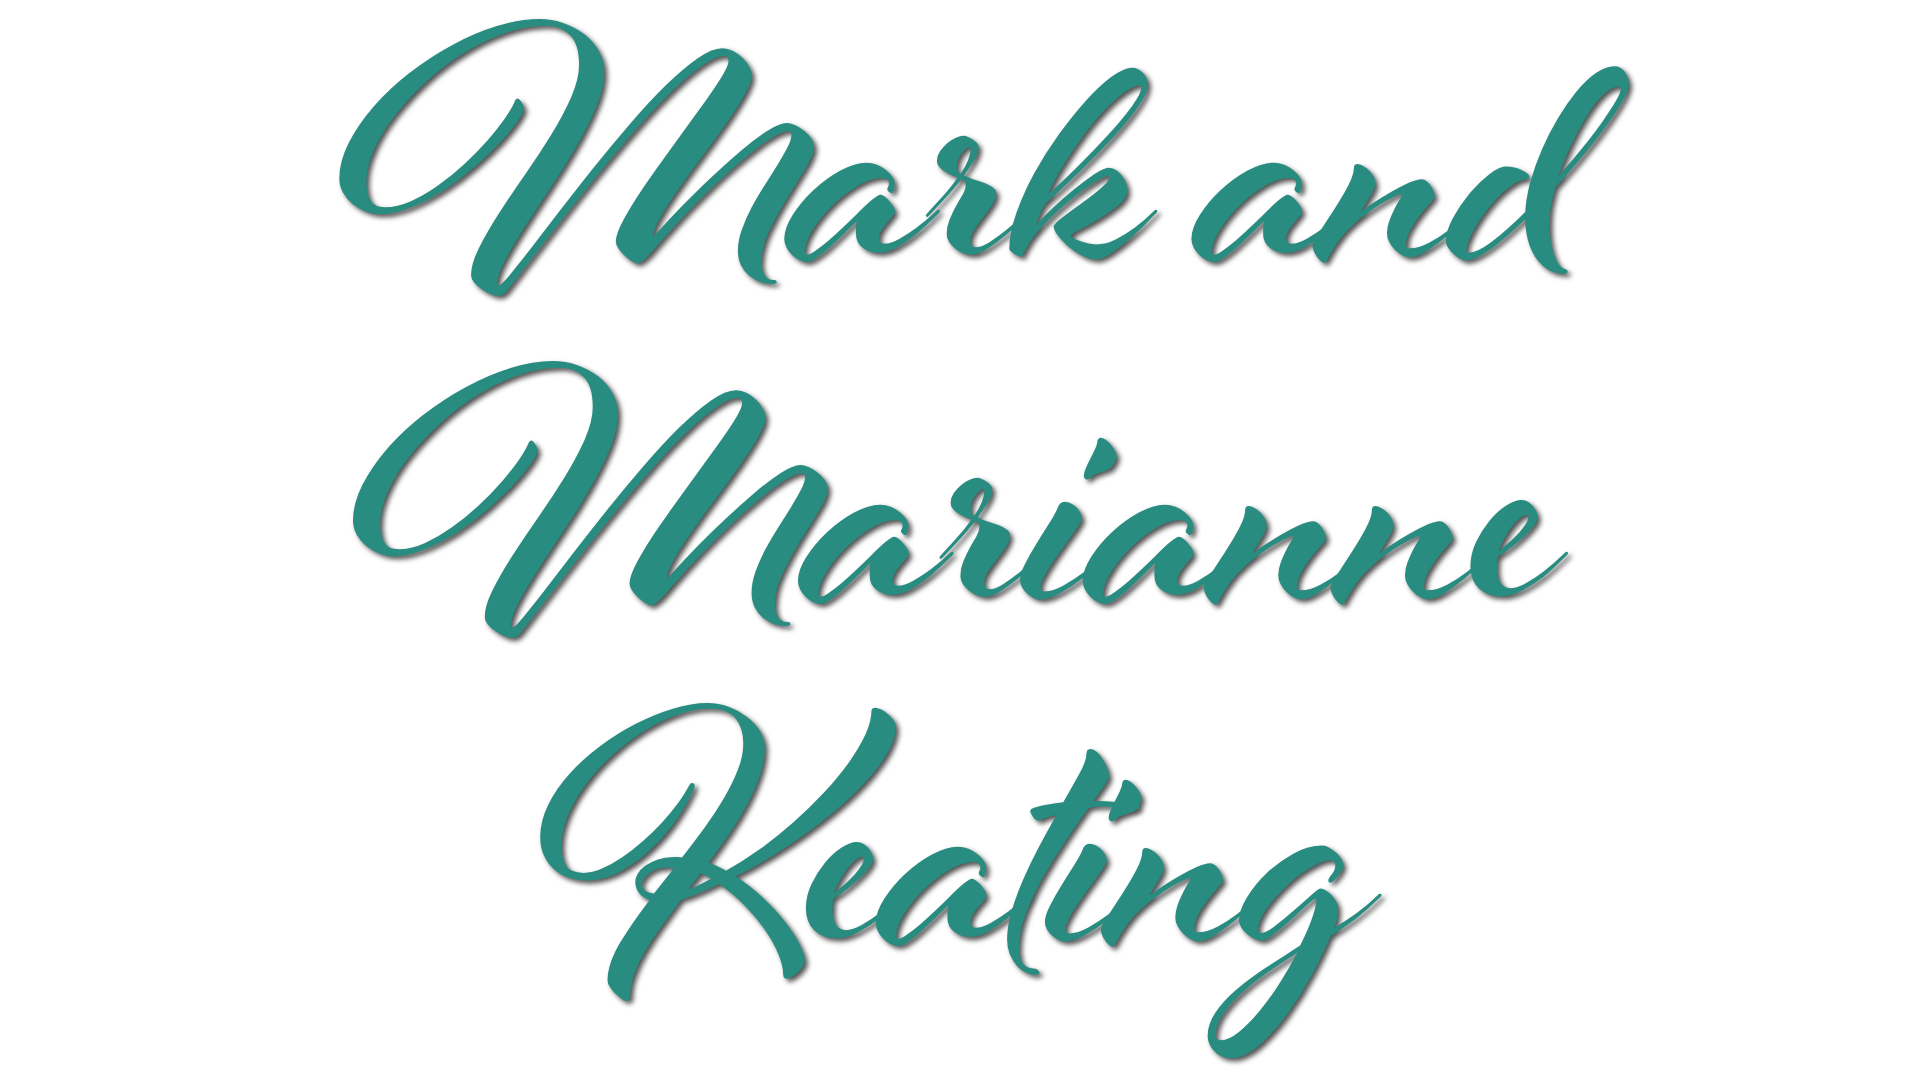 Light of Hope - Mark and Marianne Keating